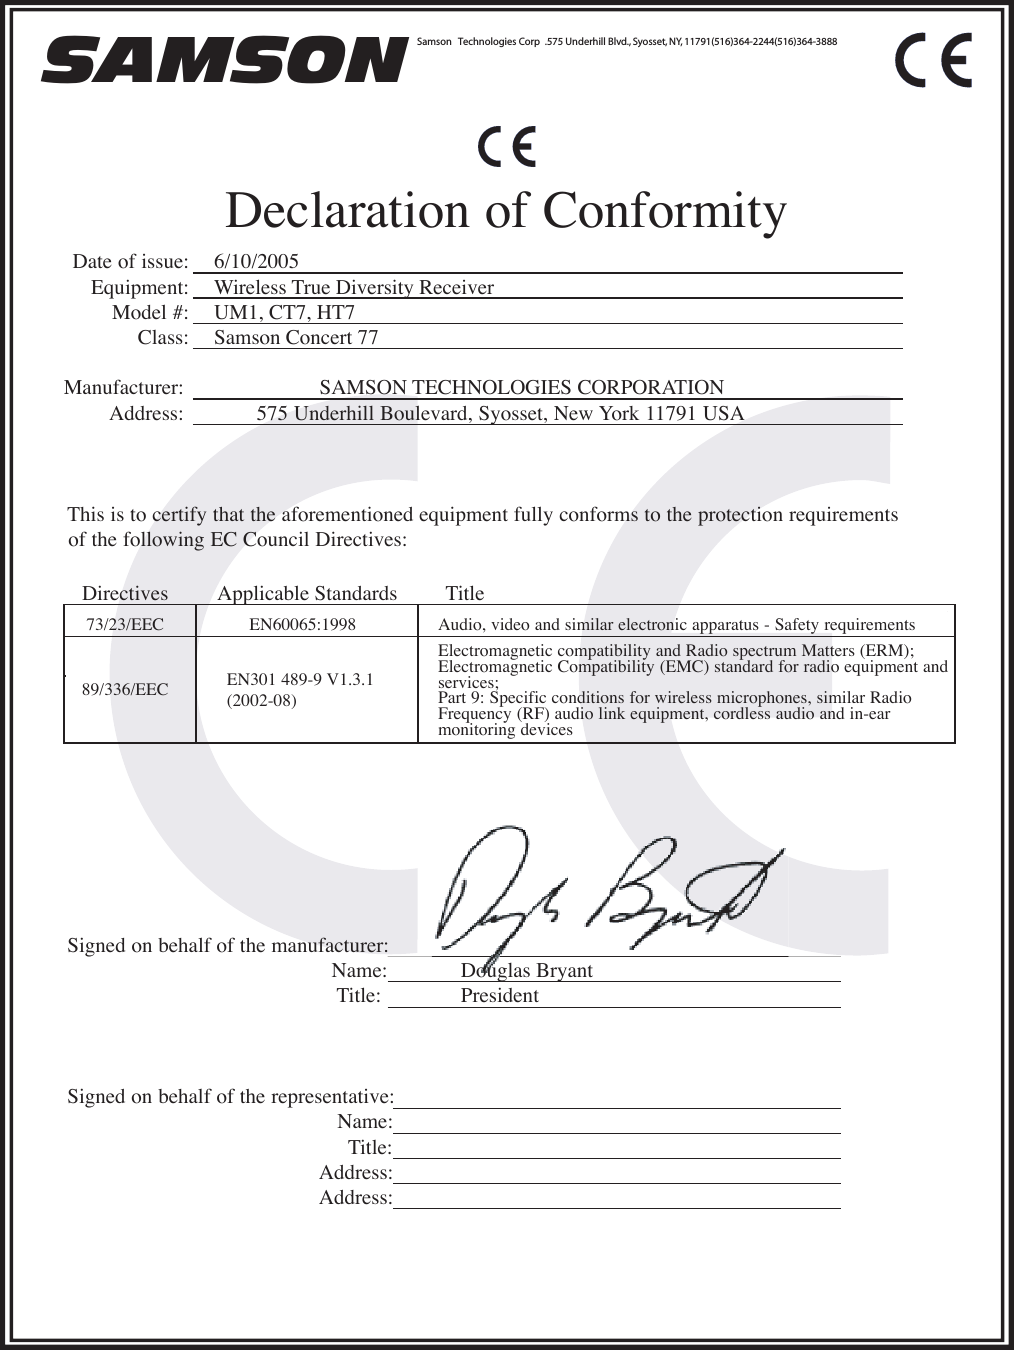 SAMSON Samson   echnologies Corp T .575 Underhill Blvd., Syosset, NY, 11791(516)364-2244(516)364-3888 Declaration of Conformity Signed on behalf of the manufacturer:  Name:Title:Signed on behalf of the representative:  Name:Title:Address:Address:Date of issue: Equipment:Model #: Class:Manufacturer:Address:This is to certify that the aforementioned equipment fully conforms to the protection requirements of the following EC Council Directives: Directives Applicable Standards  T itleSAMSON TECHNOLOGIES CORPORATION  575 Underhill Boulevard, Syosset, New York 11791 USA  89/336/EEC73/23/EEC Audio, video and similar electronic apparatus - Safety requirements EN60065:1998EN301 489-9 V1.3.1  (2002-08)Electromagnetic compatibility and Radio spectrum Matters (ERM);  Electromagnetic Compatibility (EMC) standard for radio equipment and services;Part 9: Specific conditions for wireless microphones, similar Radio Frequency (RF) audio link equipment, cordless audio and in-ear  monitoring devices 6/10/2005Wireless True Diversity Receiver UM1, CT7, HT7 Samson Concert 77 Douglas Bryant President